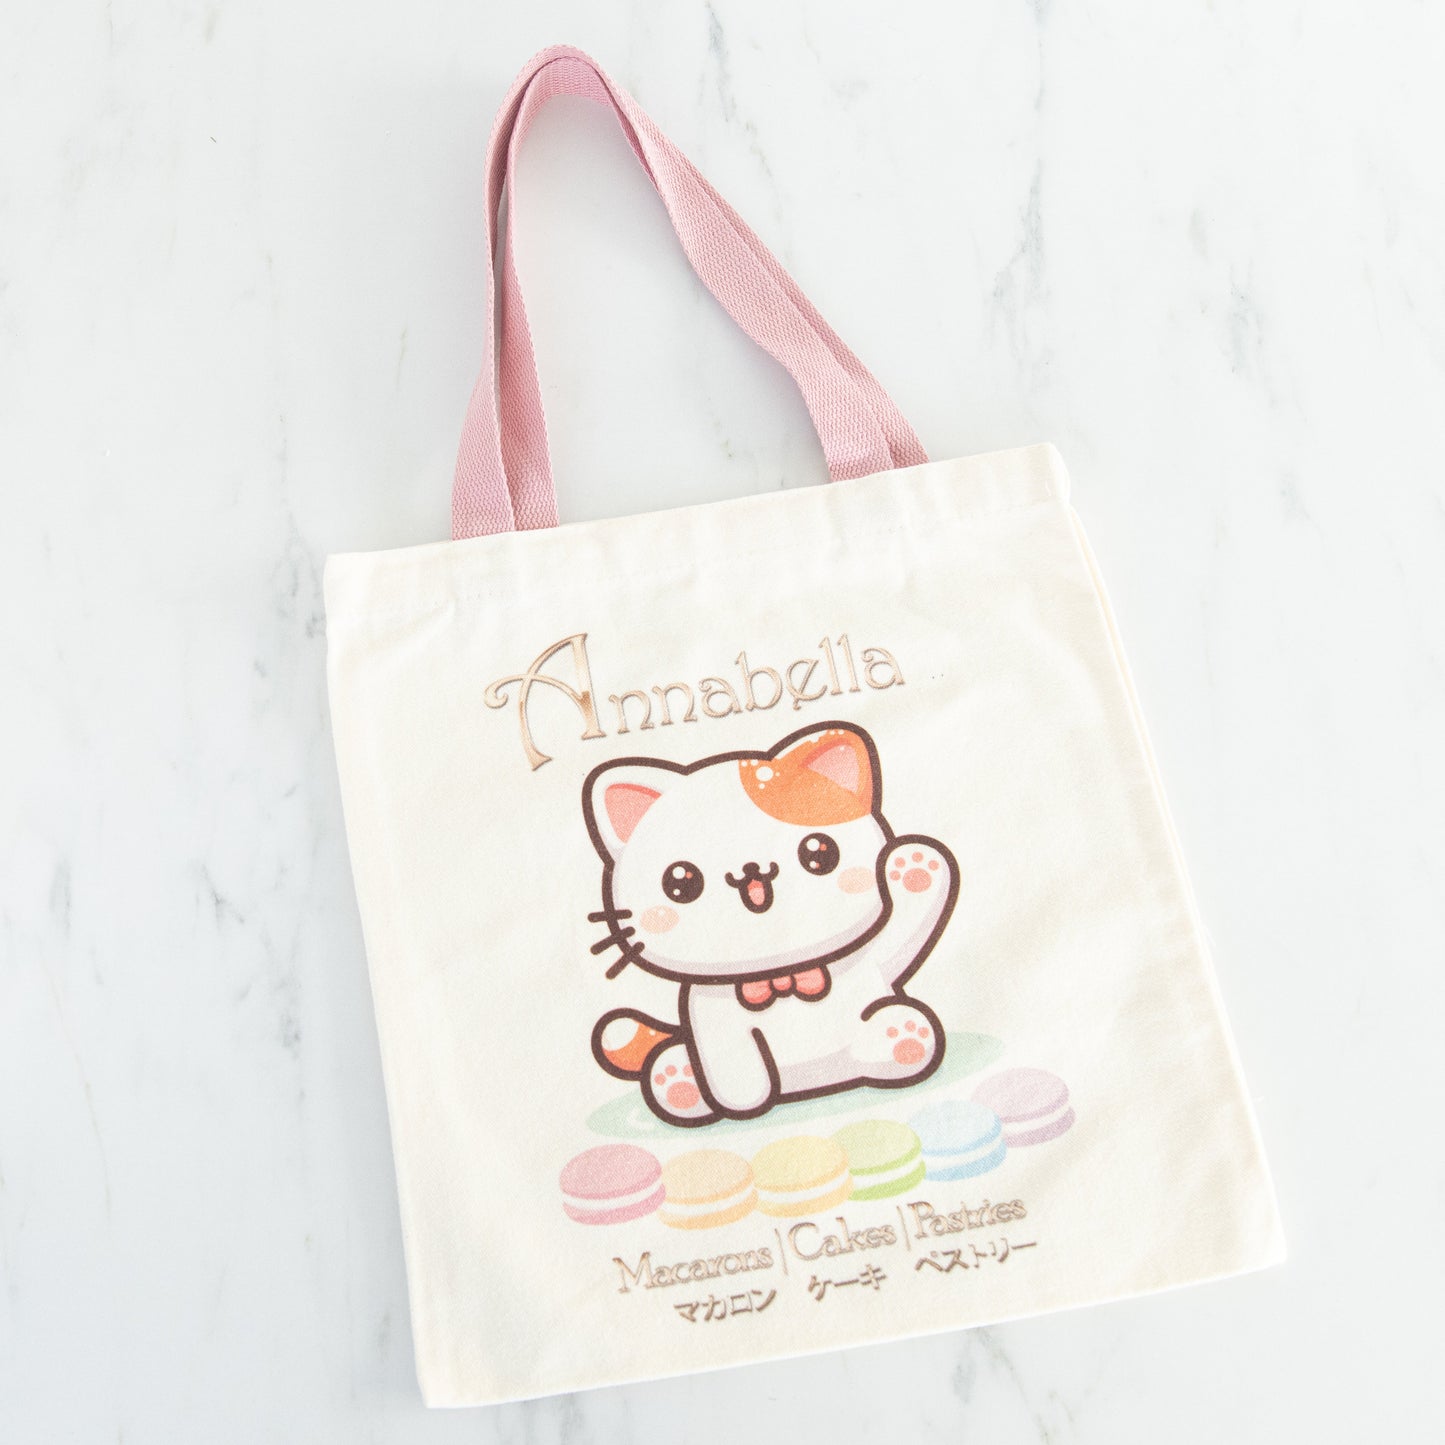 Tote Bag Size (32cmx36cm) - Dazzling Dinosaur [Delivery Date 6 - 12 May]